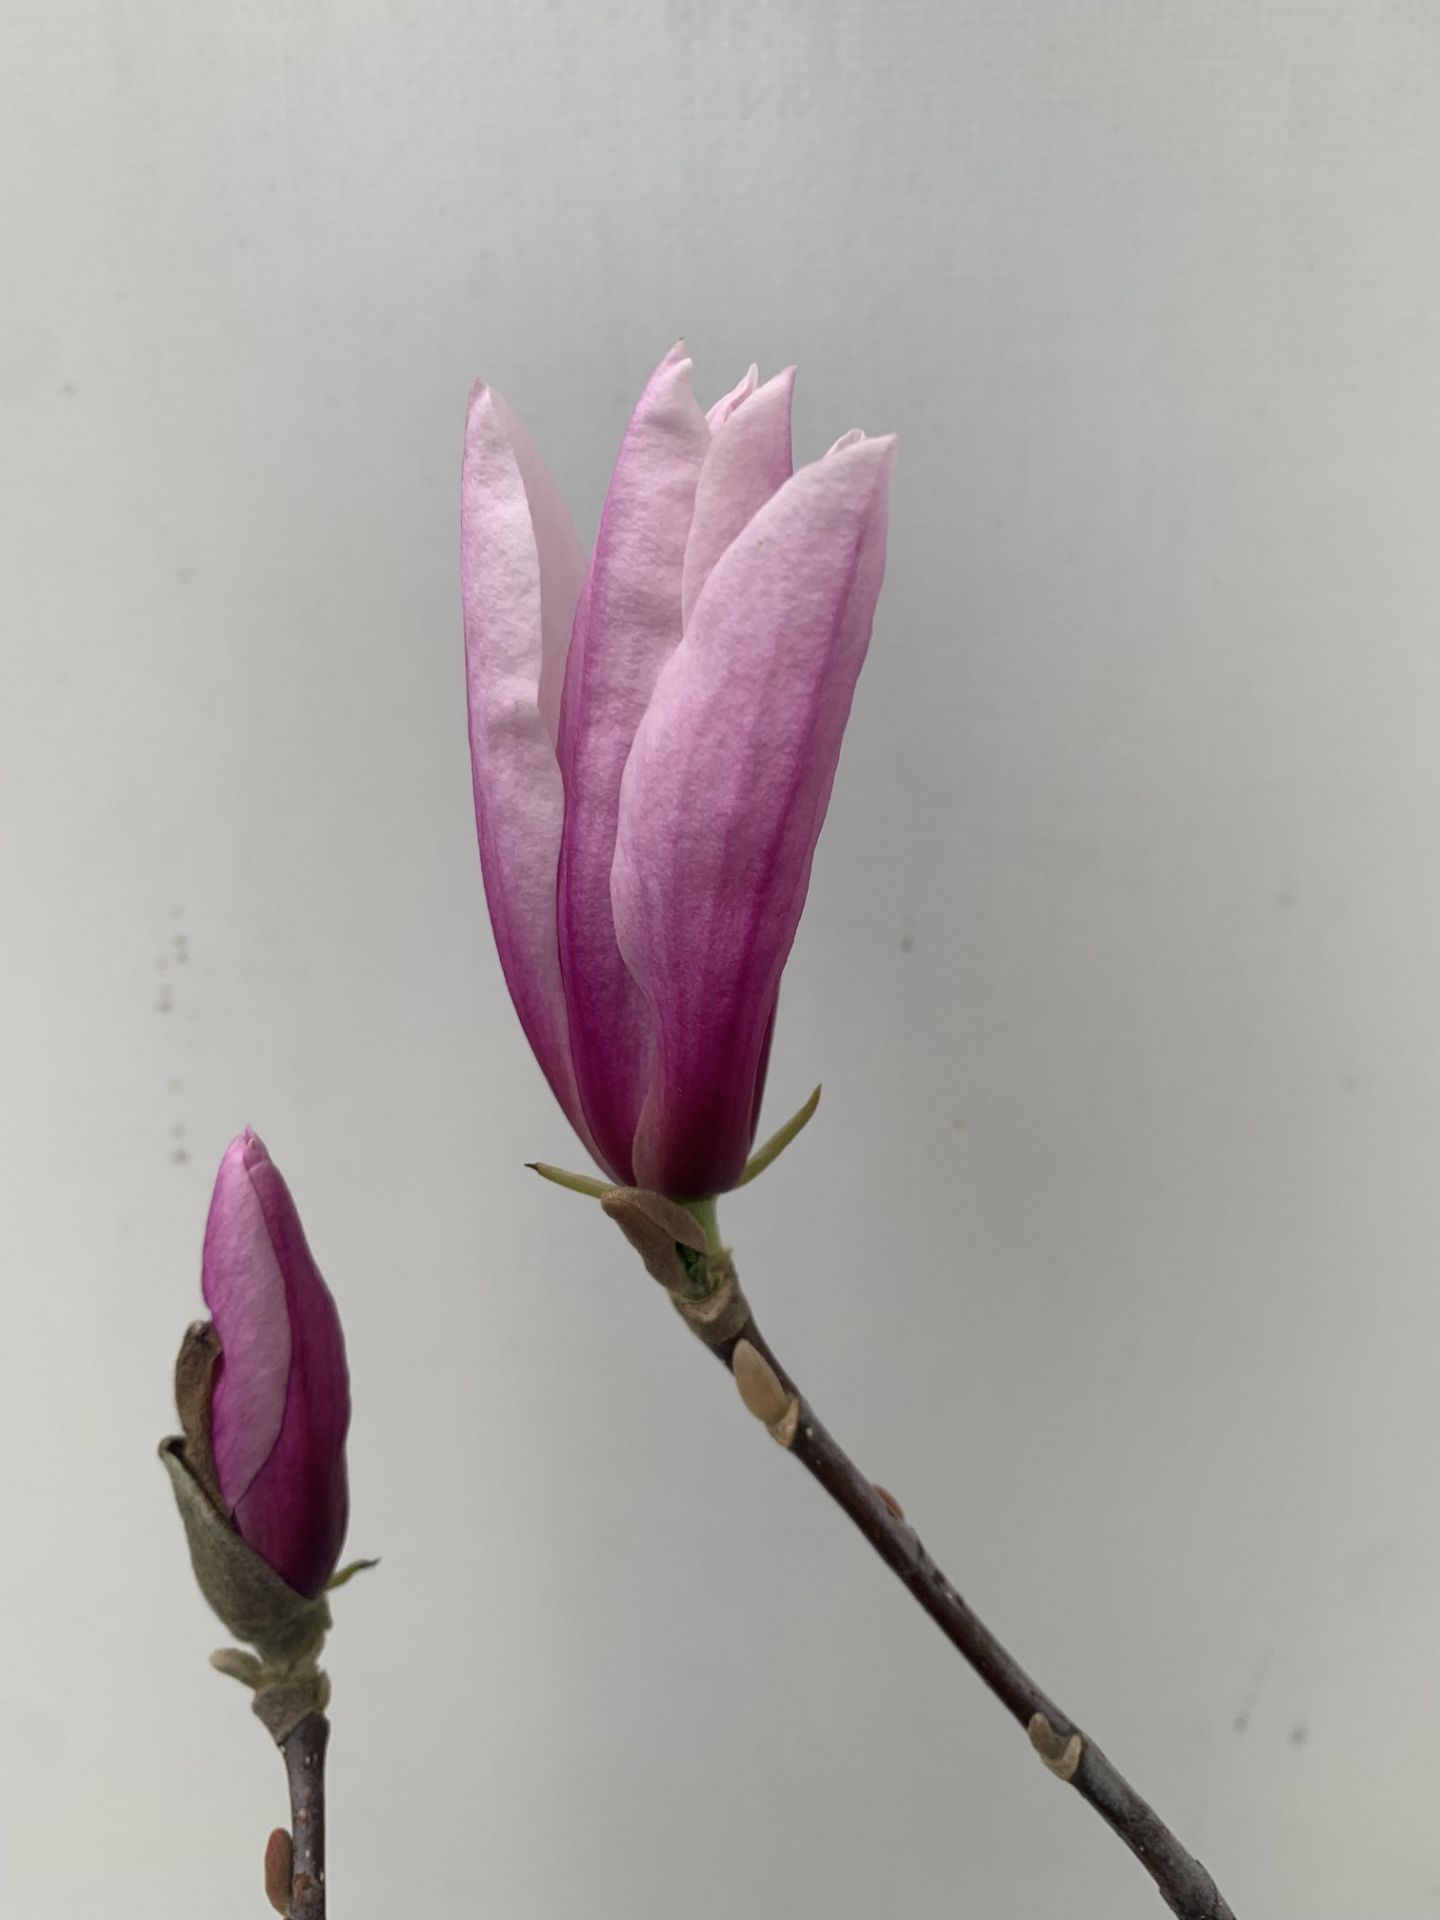 ONE MAGNOLIA PINK 'BETTY' APPROX 120CM IN HEIGHT IN 7 LTR POT PLUS VAT - Image 7 of 12